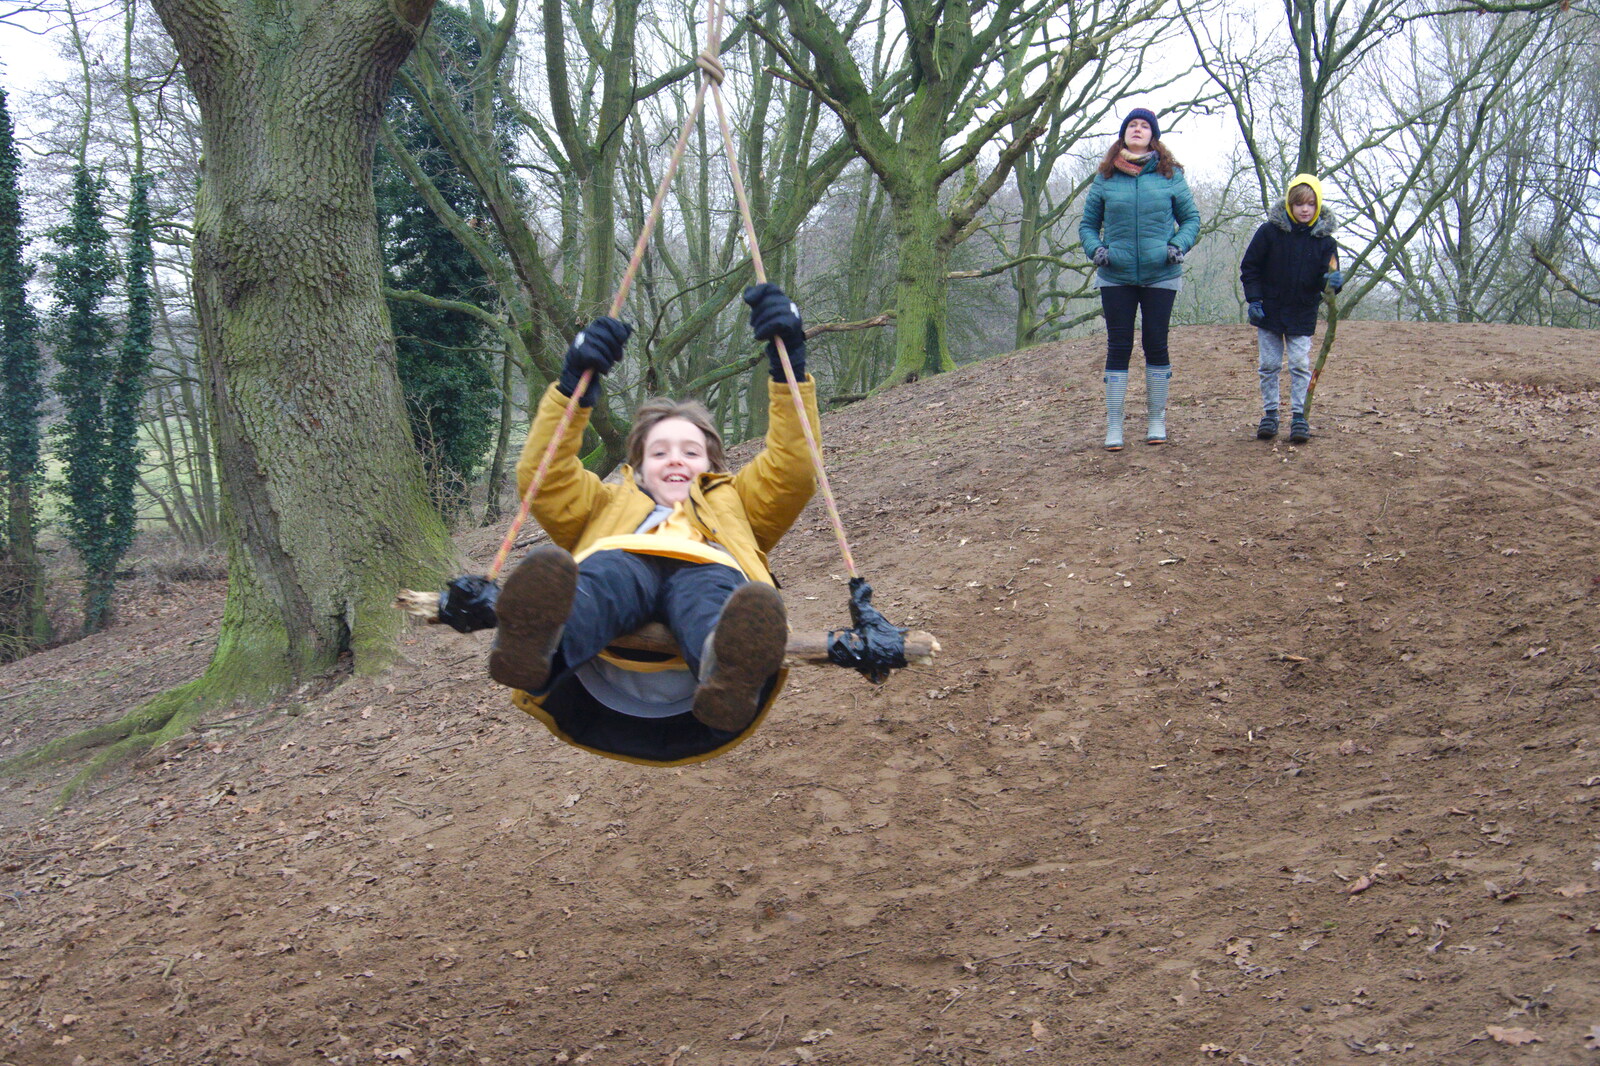 Fred has a swing from New Year's Day on the Ling, Wortham, Suffolk - 1st January 2020